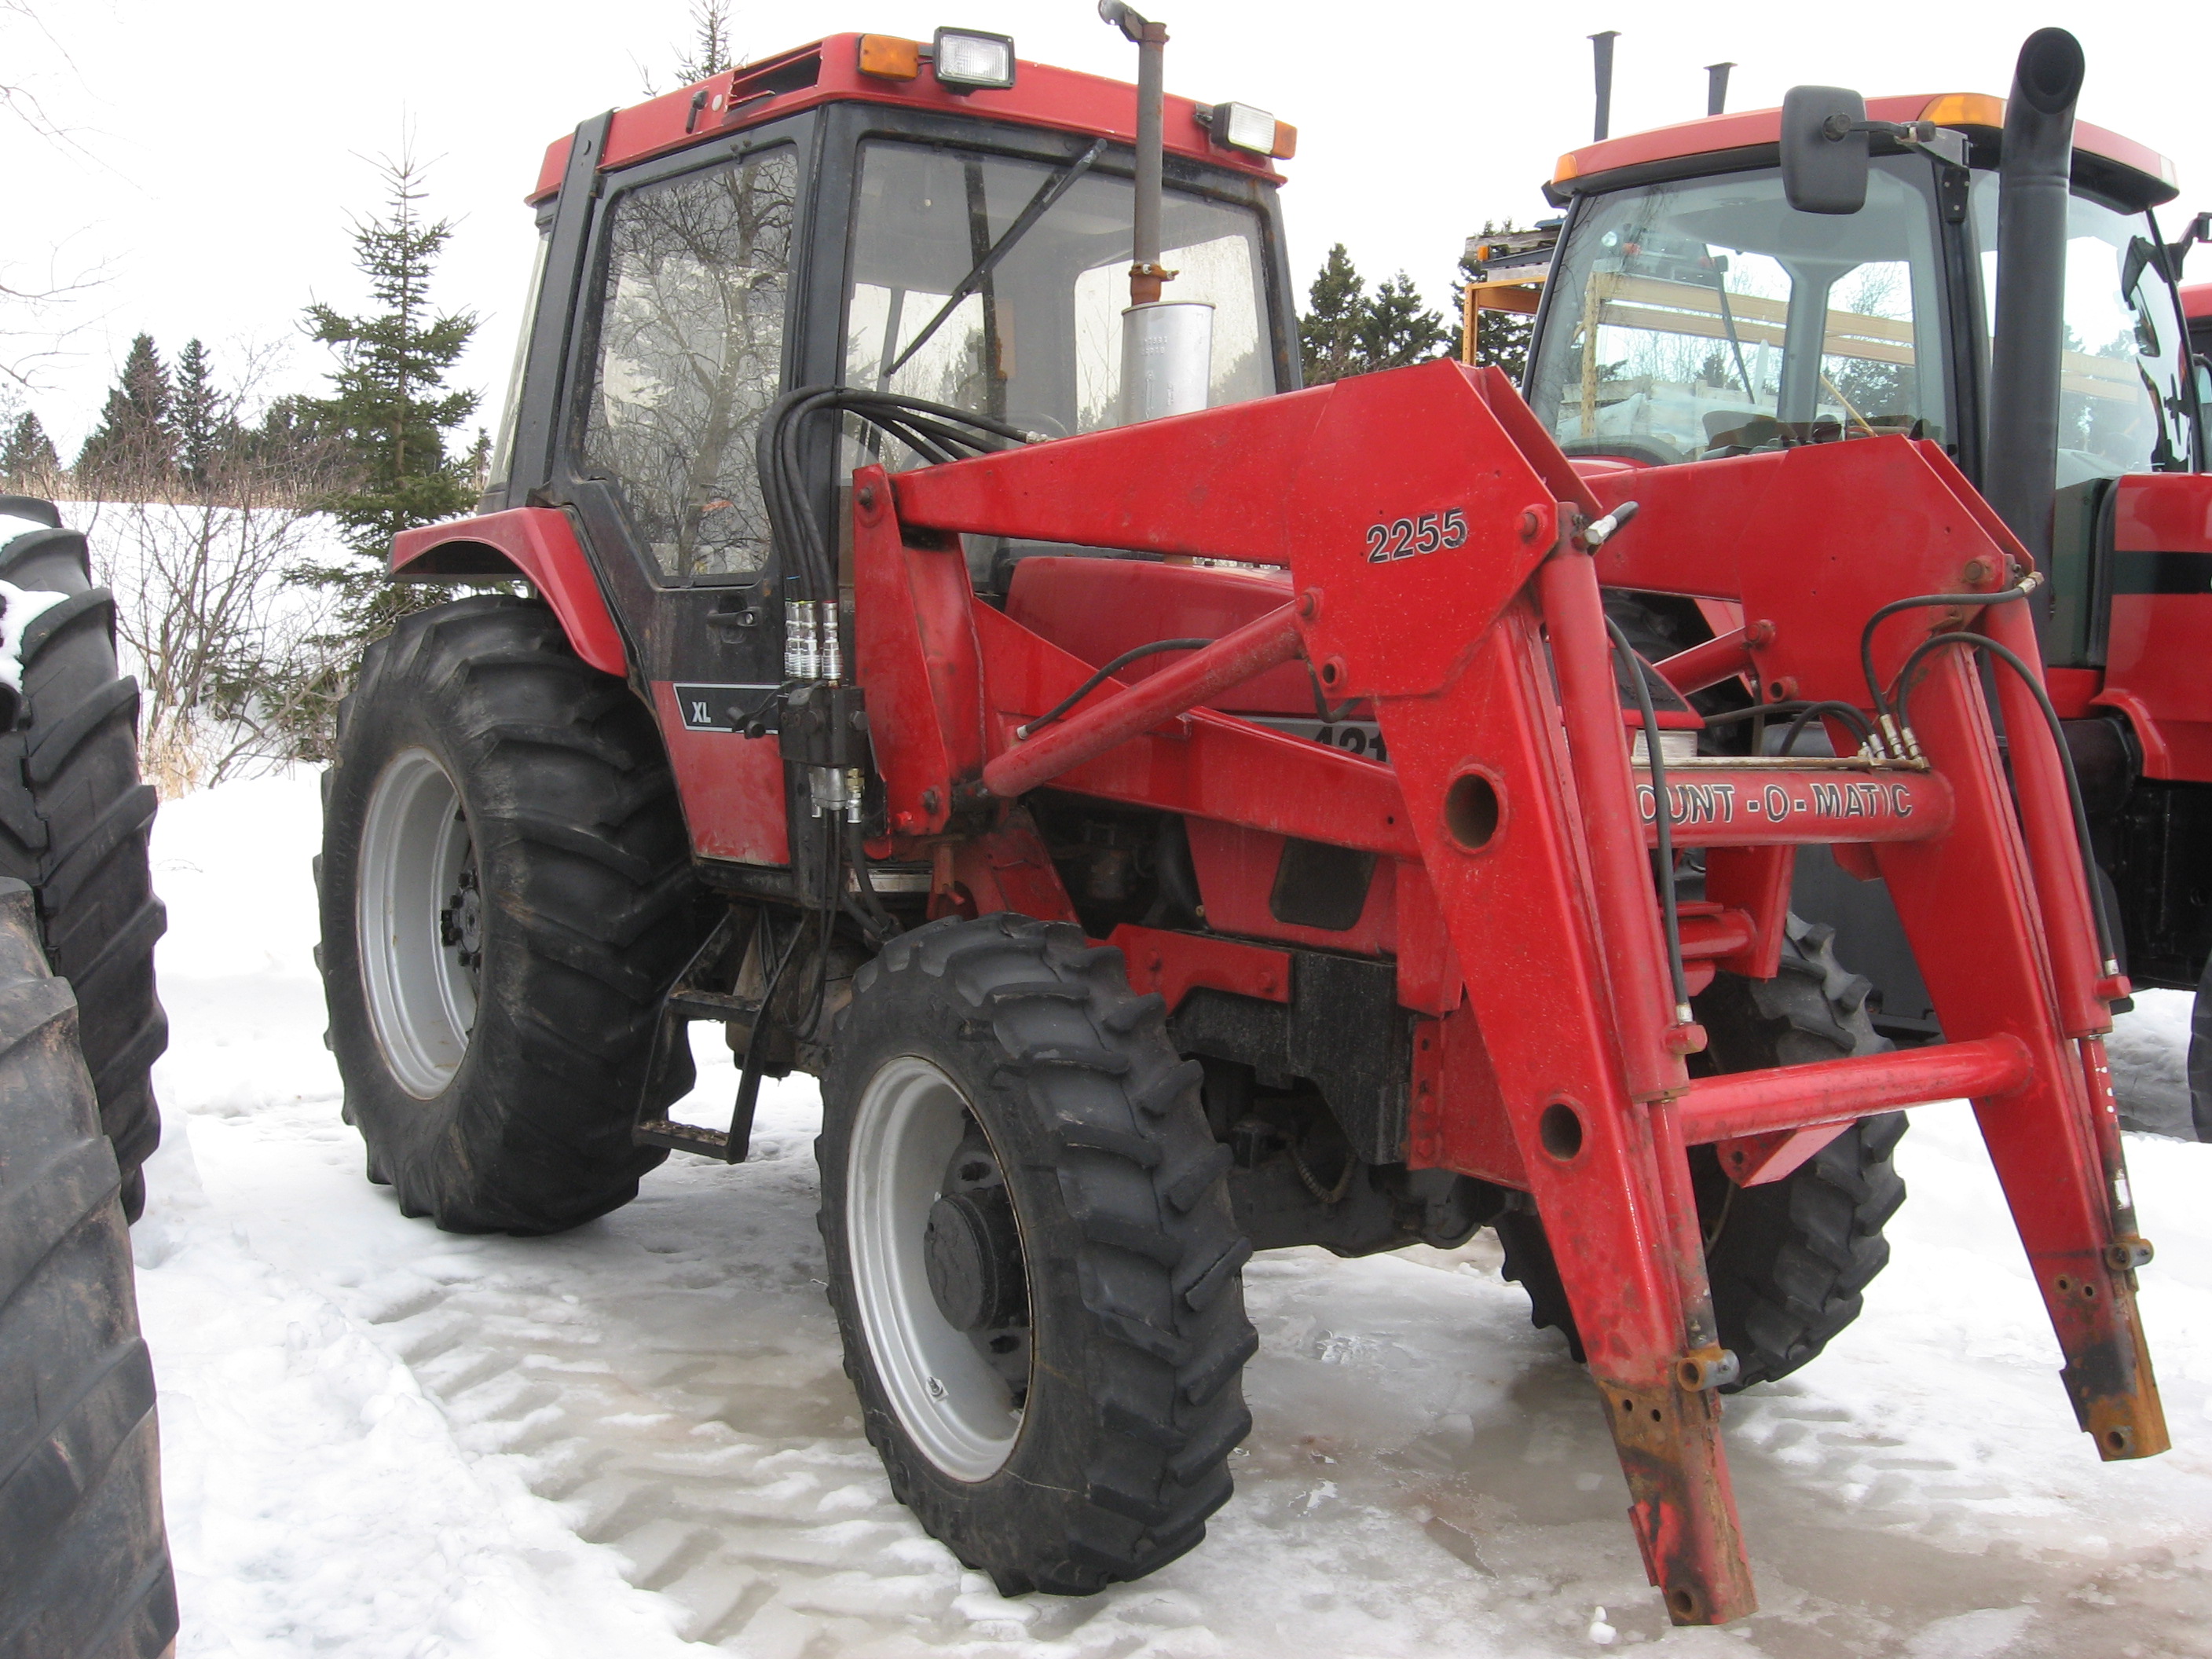 Case ih 4210. Photos and comments. www.picautos.com